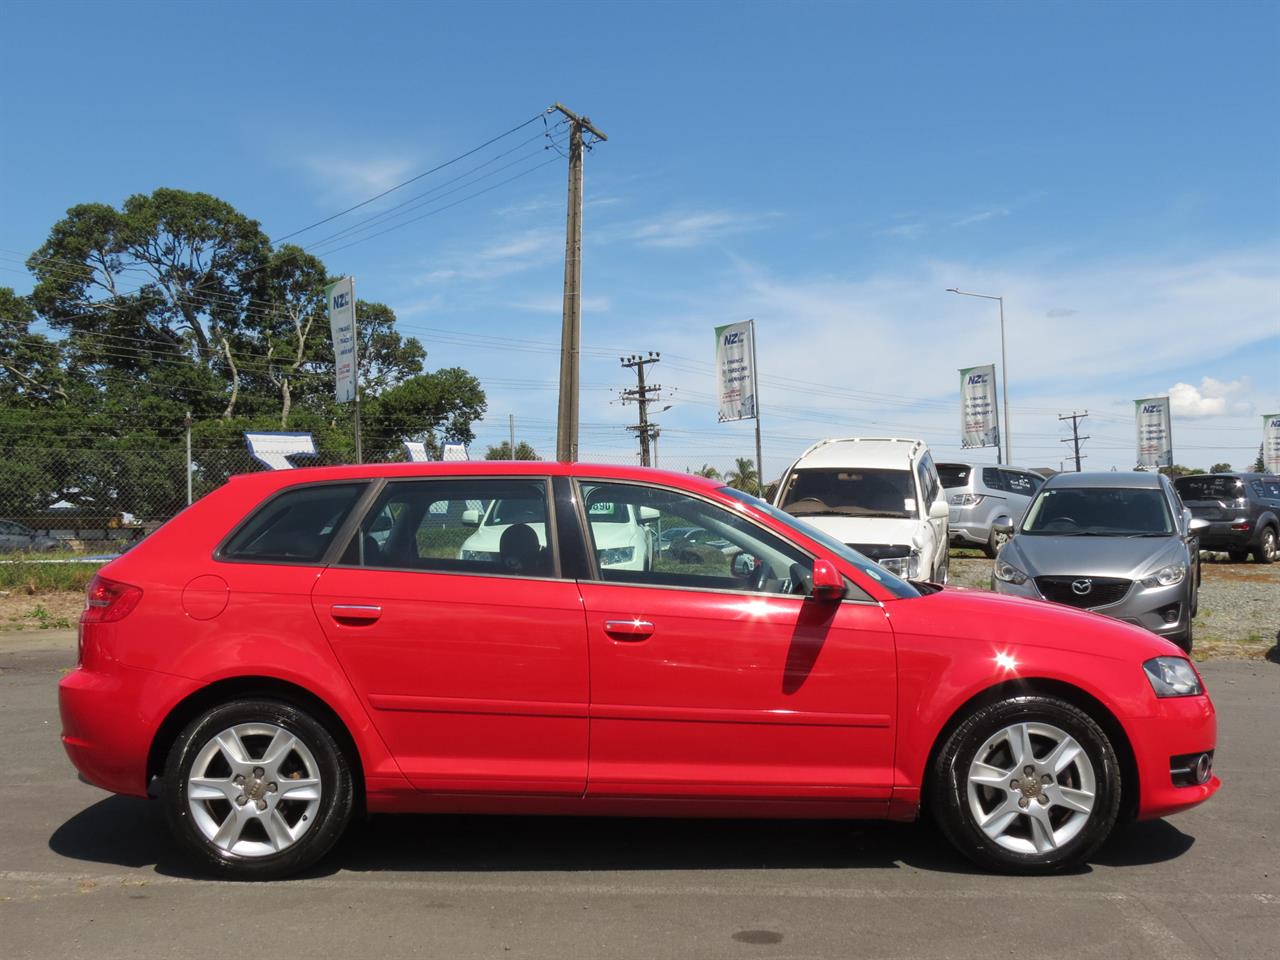 2010 Audi A3 only $39 weekly